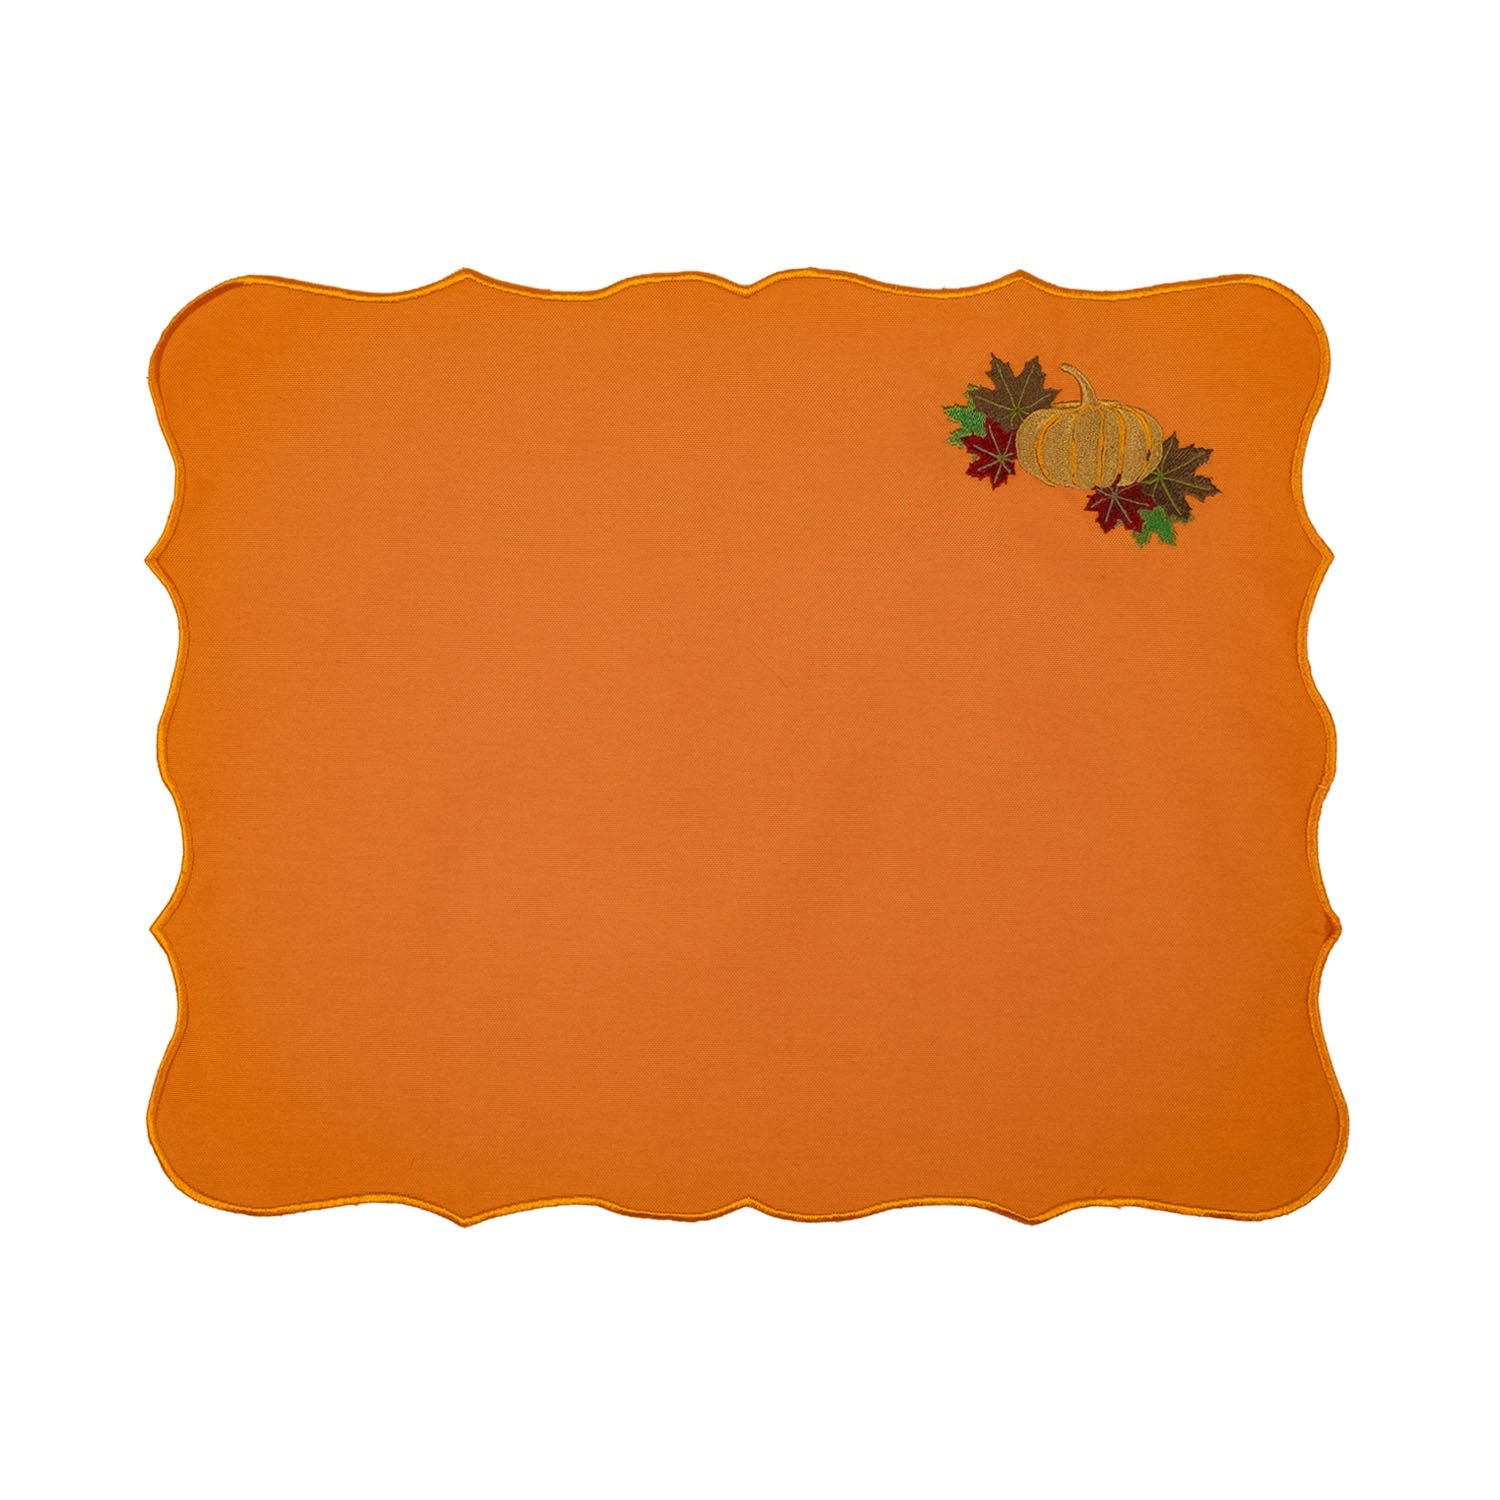 Pumpkin Embroidery Cotton Placemat  (Set of 2)